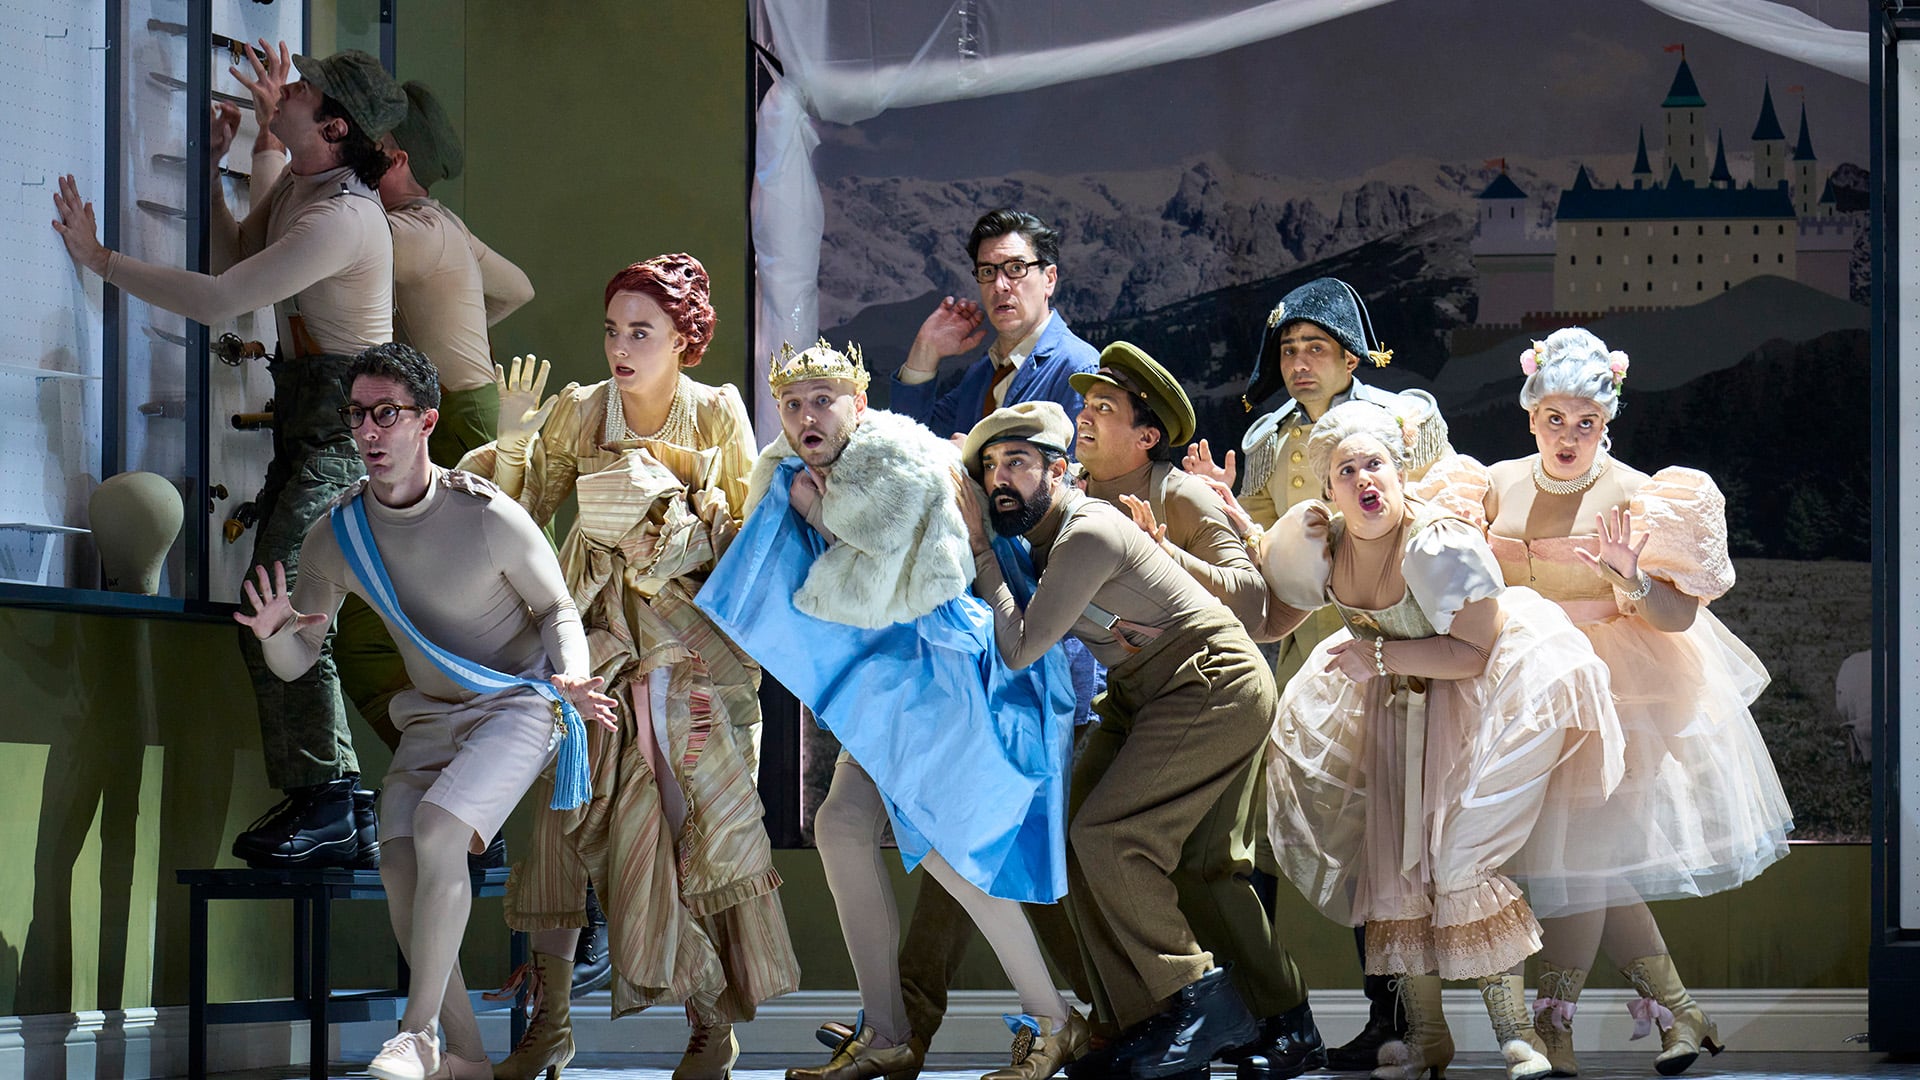 English Touring Opera's Cinderella production photo. A mixed group of people, men wearing beige leotards and Napoleonic army uniforms, and woman wearing white frilly dress, move together as if sneaking around. In the centre of the group, a man wearing a golden grown, white fur coast covering themselves with a large piece of blue fabric. Behind them, beige walls with cabinets filled with swords and a large painting of an alpine castle.